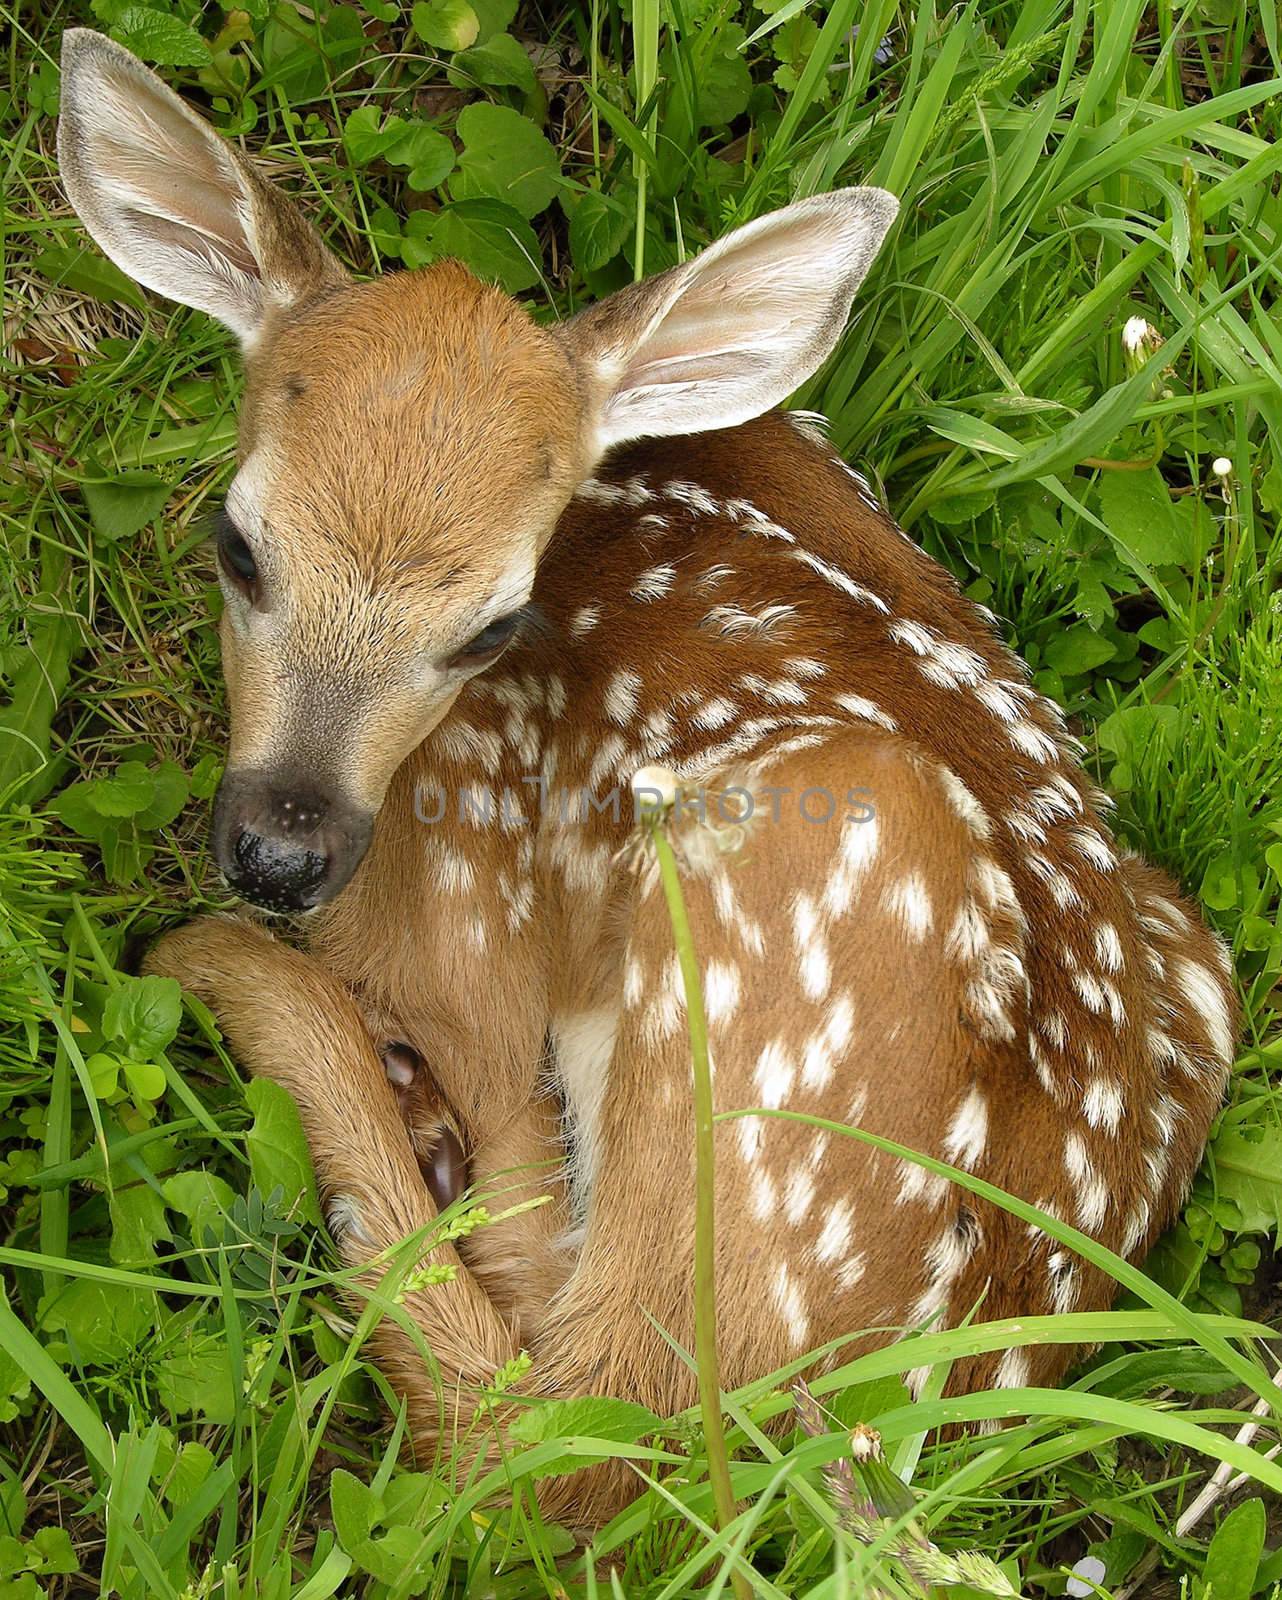 Newborn Whitetail deer fawn curled up in the grass.